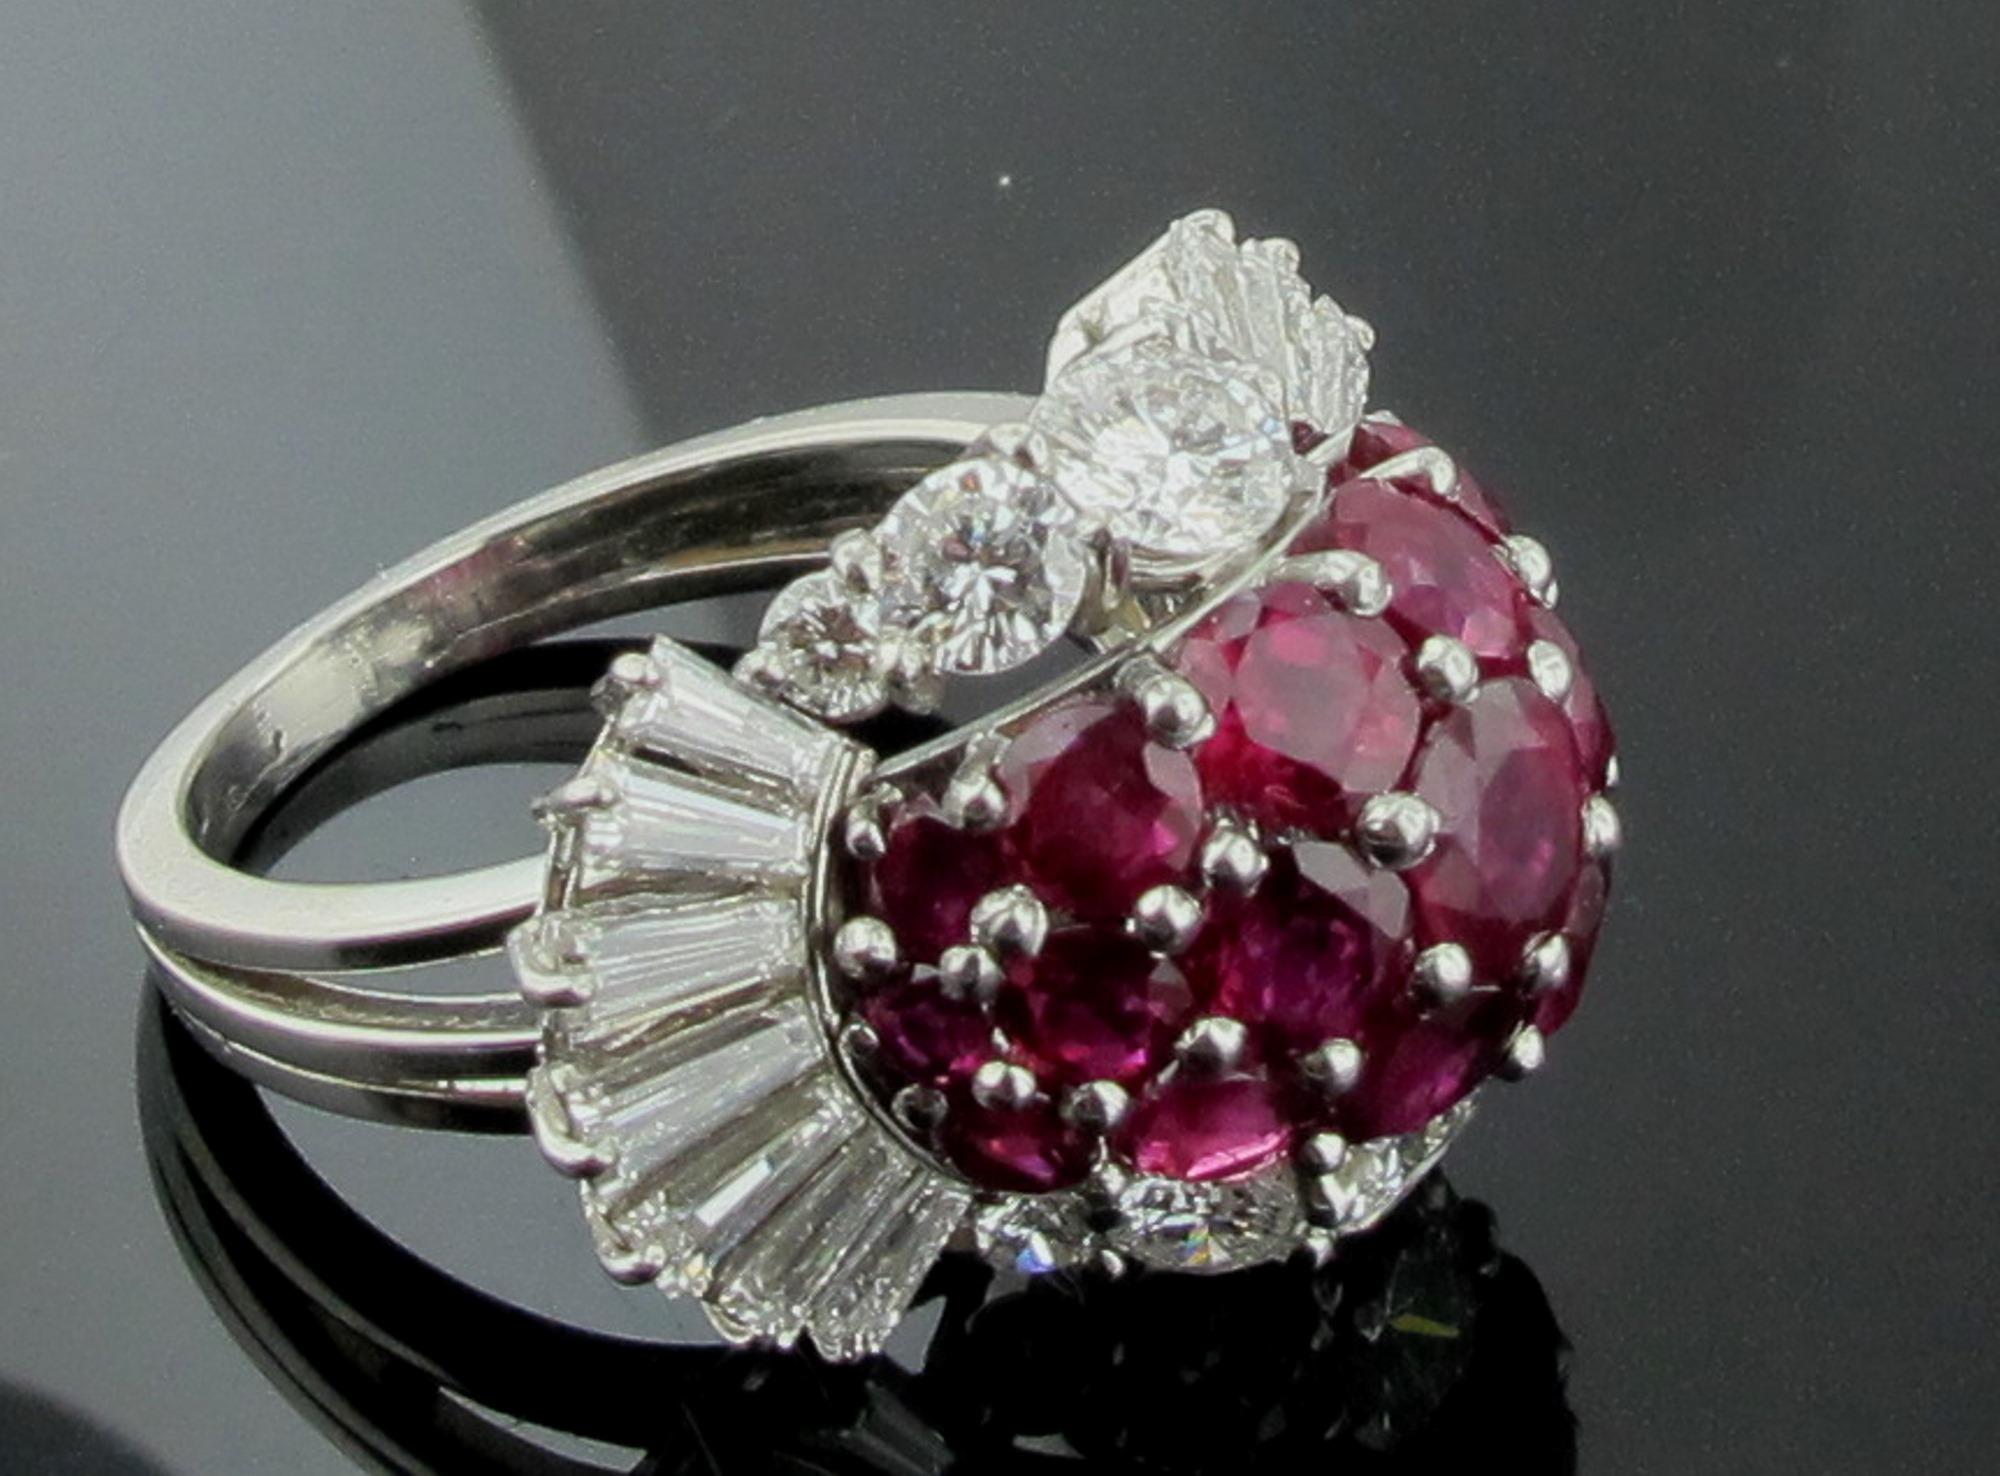 Set in white gold are 19 round cut Burmese Rubies for a weight of 5.68 carats surrounded with 14 baguette cut diamonds and 10 round brilliant cut diamonds for a total diamond weight of 3.69 carats.  Ring size is 8.